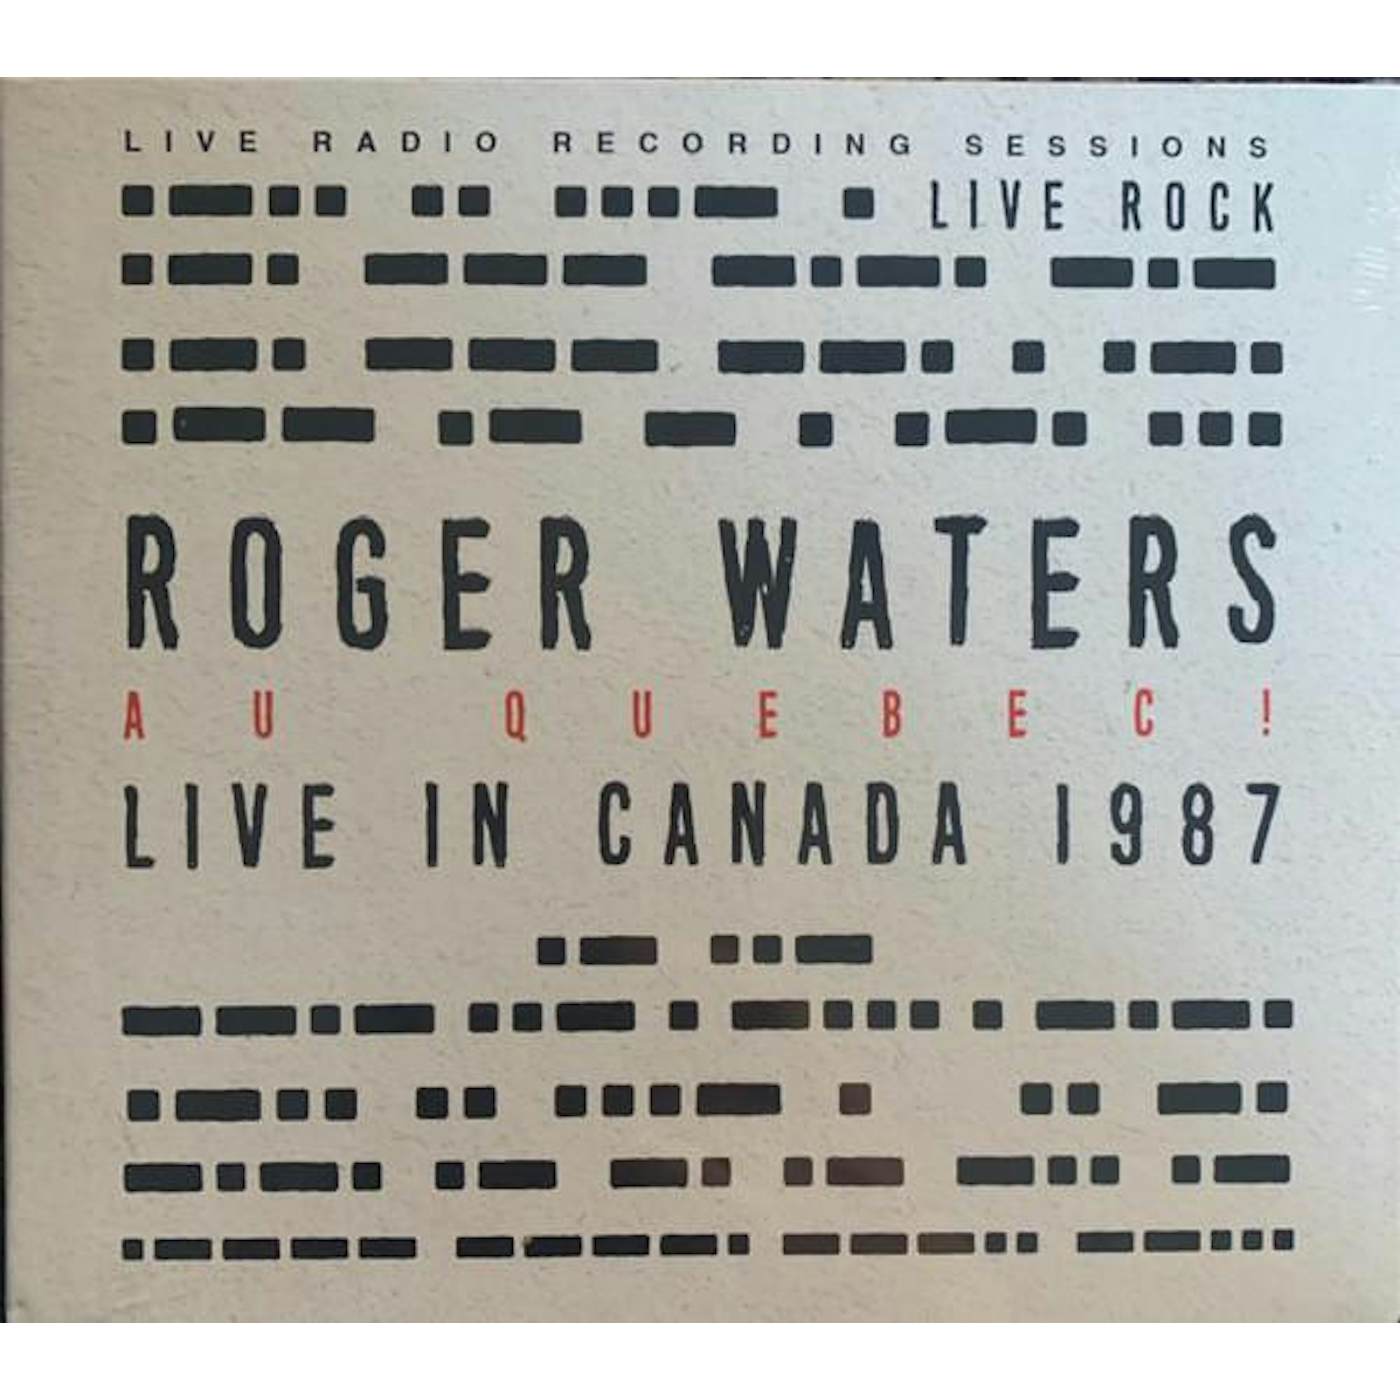 Roger Waters AU QUEBEC! (LIVE IN CANADA 1987) CD